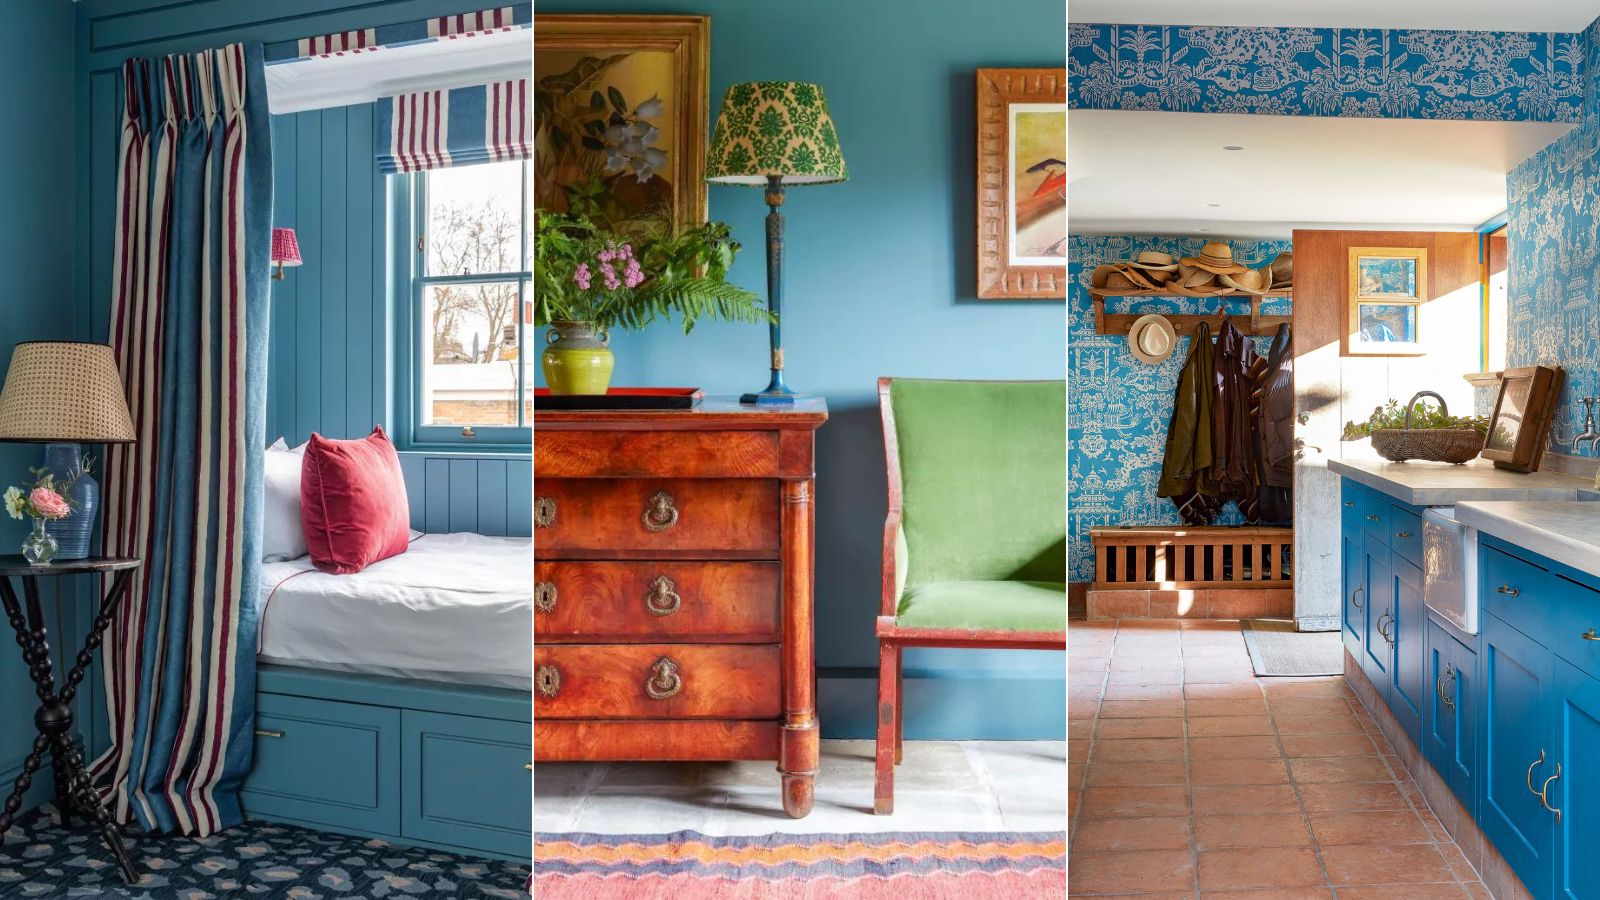 1 How to use cerulean in an entryway